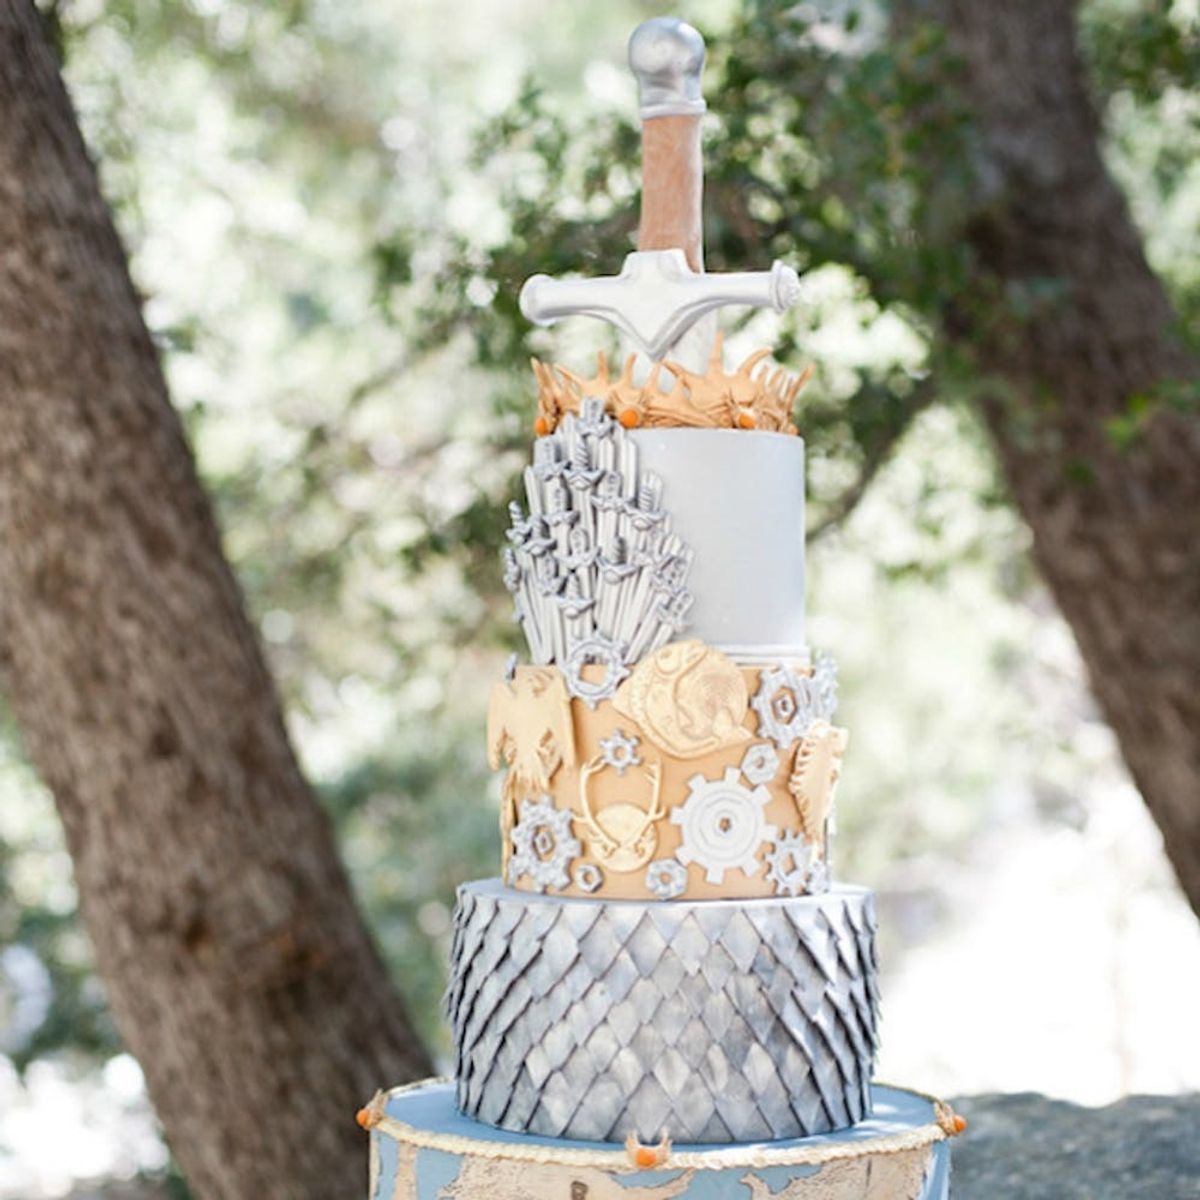 15 Geeky Wedding Cakes for All the Book Lovers Out There